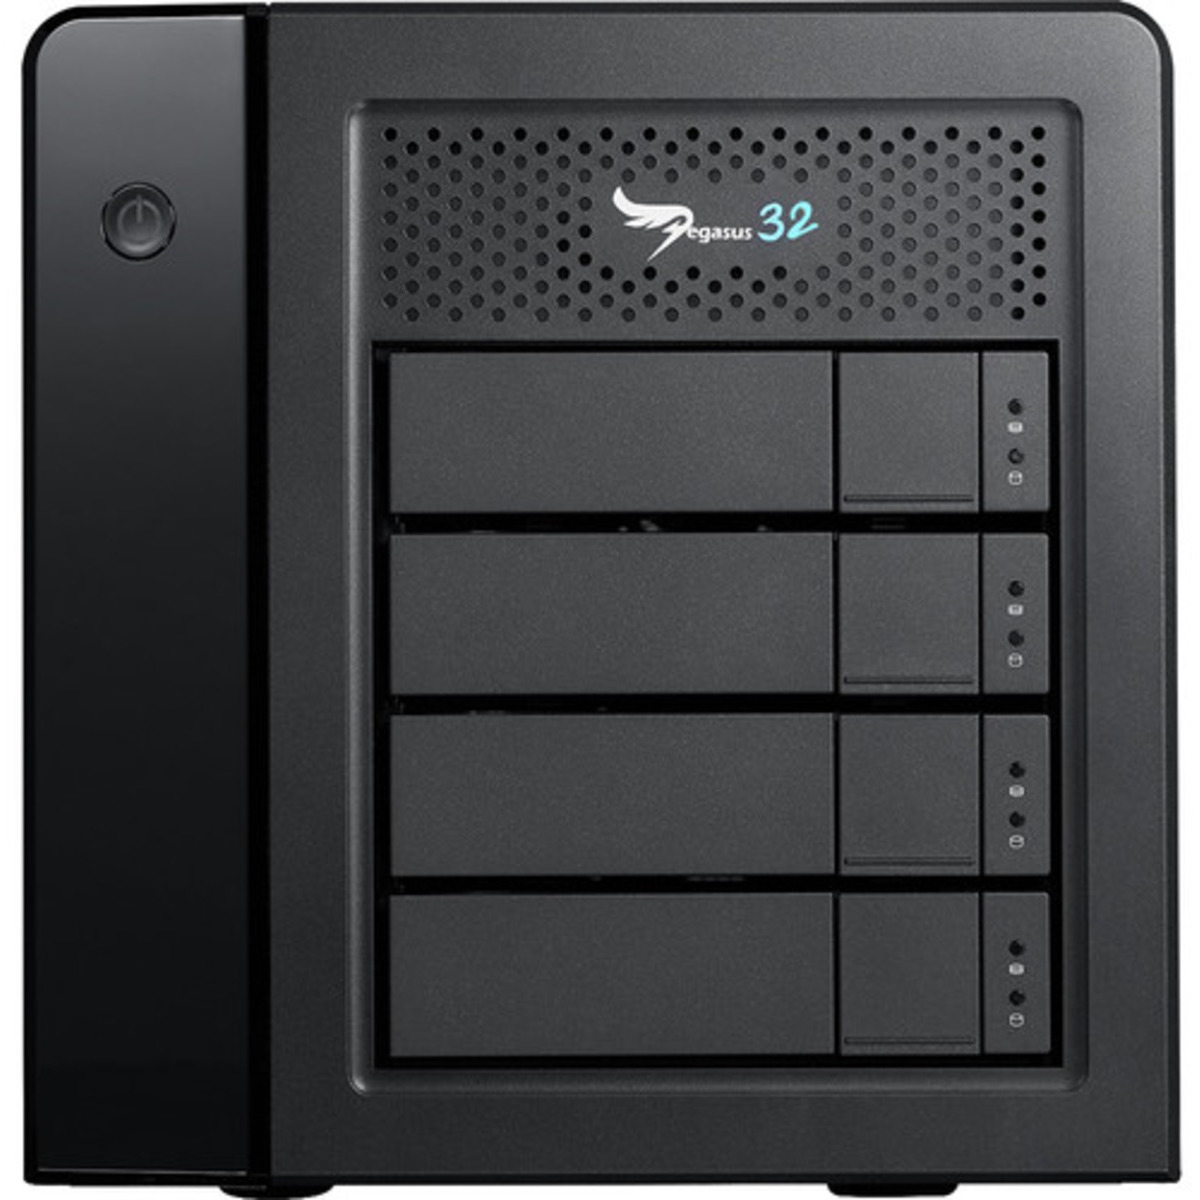 Promise Technology Pegasus32 R4 Thunderbolt 3 64tb 4-Bay Desktop Multimedia / Power User / Business DAS - Direct Attached Storage Device 4x16tb Seagate IronWolf Pro ST16000NT001 3.5 7200rpm SATA 6Gb/s HDD NAS Class Drives Installed - Burn-In Tested - ON SALE Pegasus32 R4 Thunderbolt 3